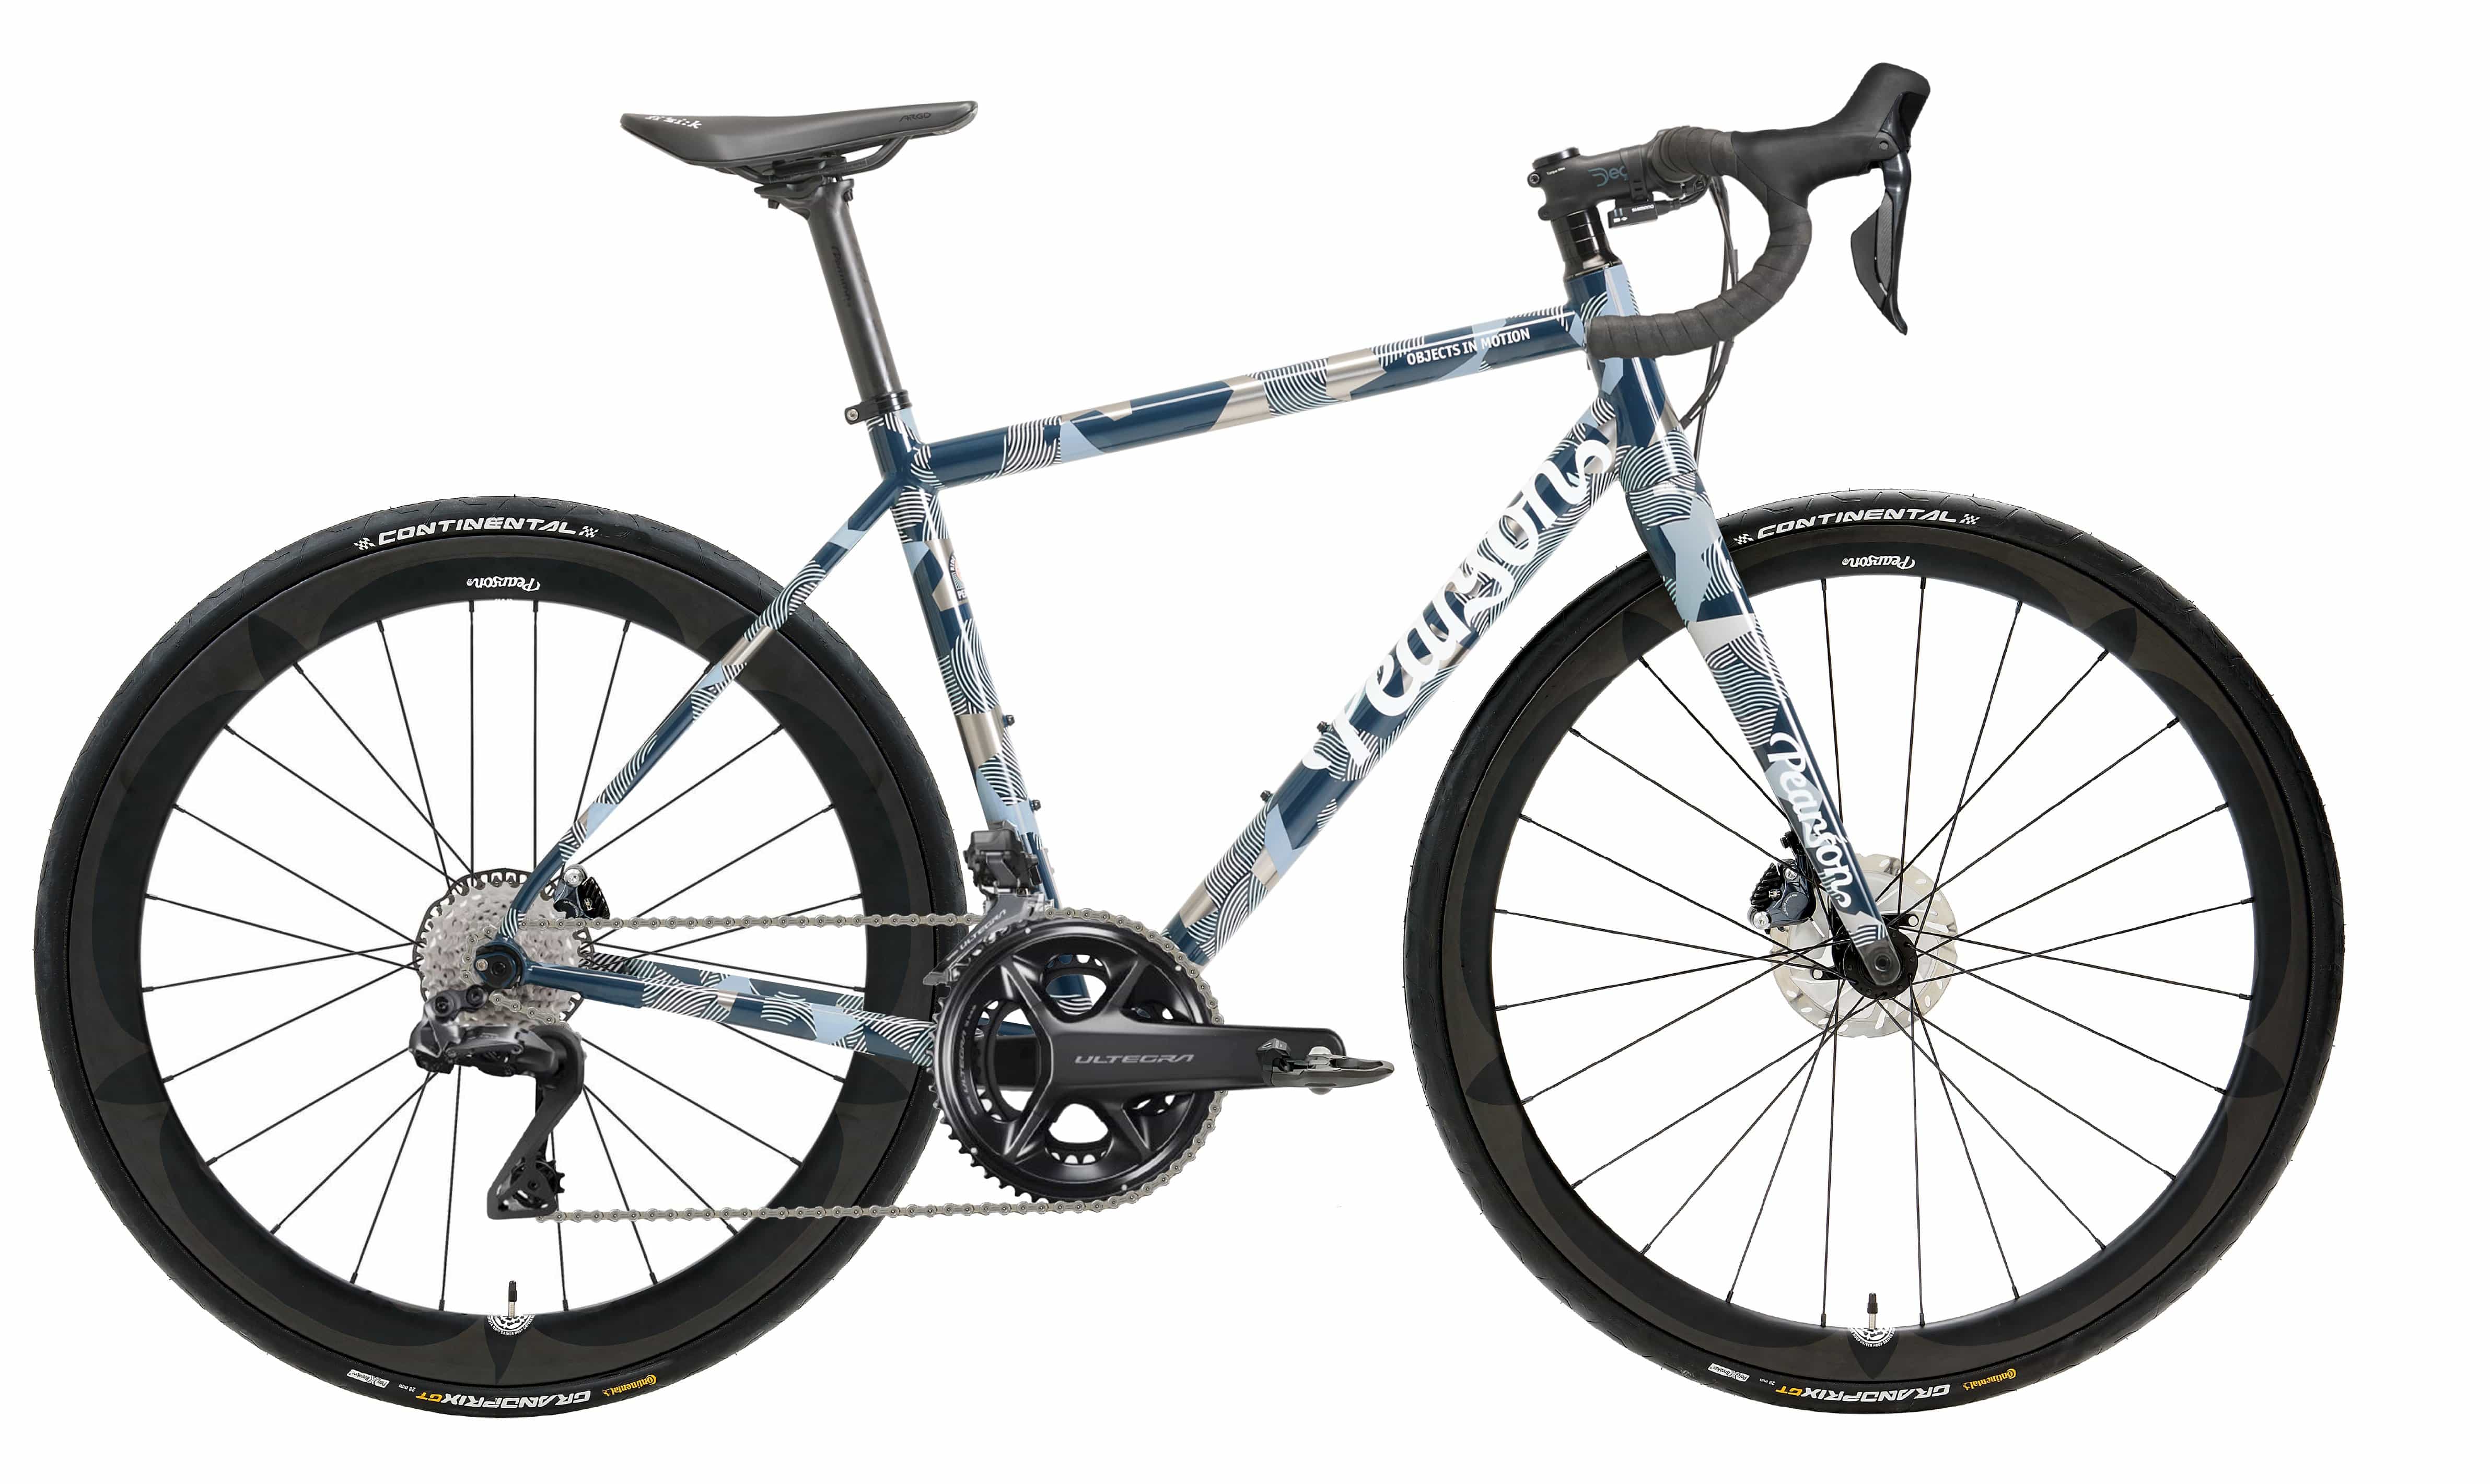 Pcs  Objects In Motion - Titanium Road Bike  Large / Blue Camo / Shimano Ultegra R8170 12 Speed Di2 - Hoopdriver Cut And Thrust Carbon Wheels